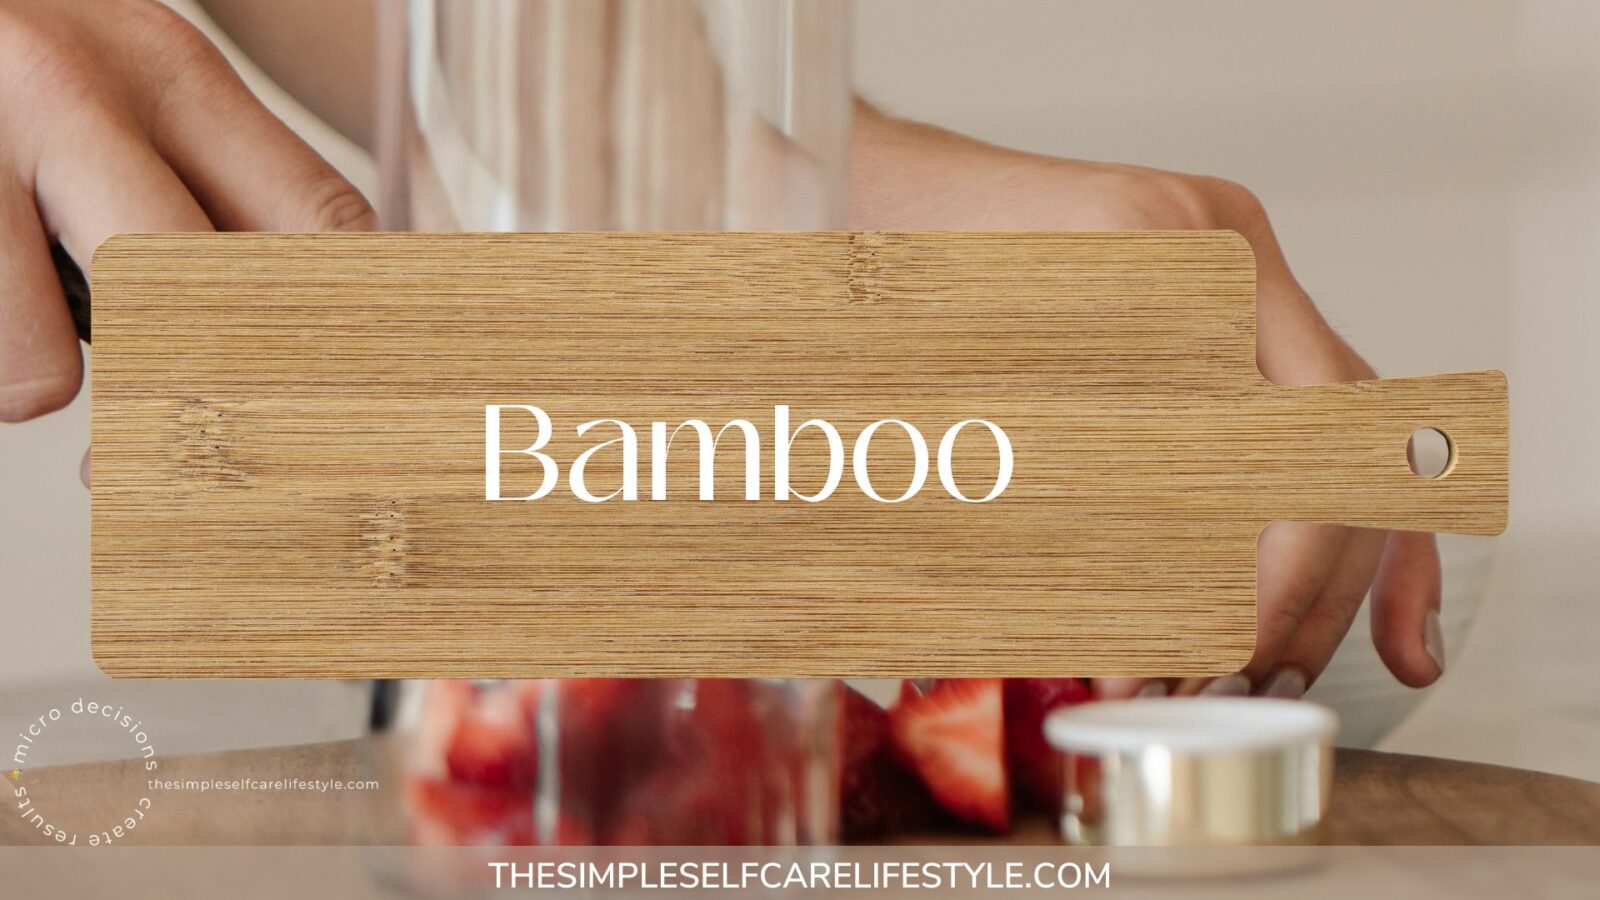 Non-toxic Cutting Boards made from Bamboo. A Bamboo word across a bamboo board. Behind that are hands cutting on board.